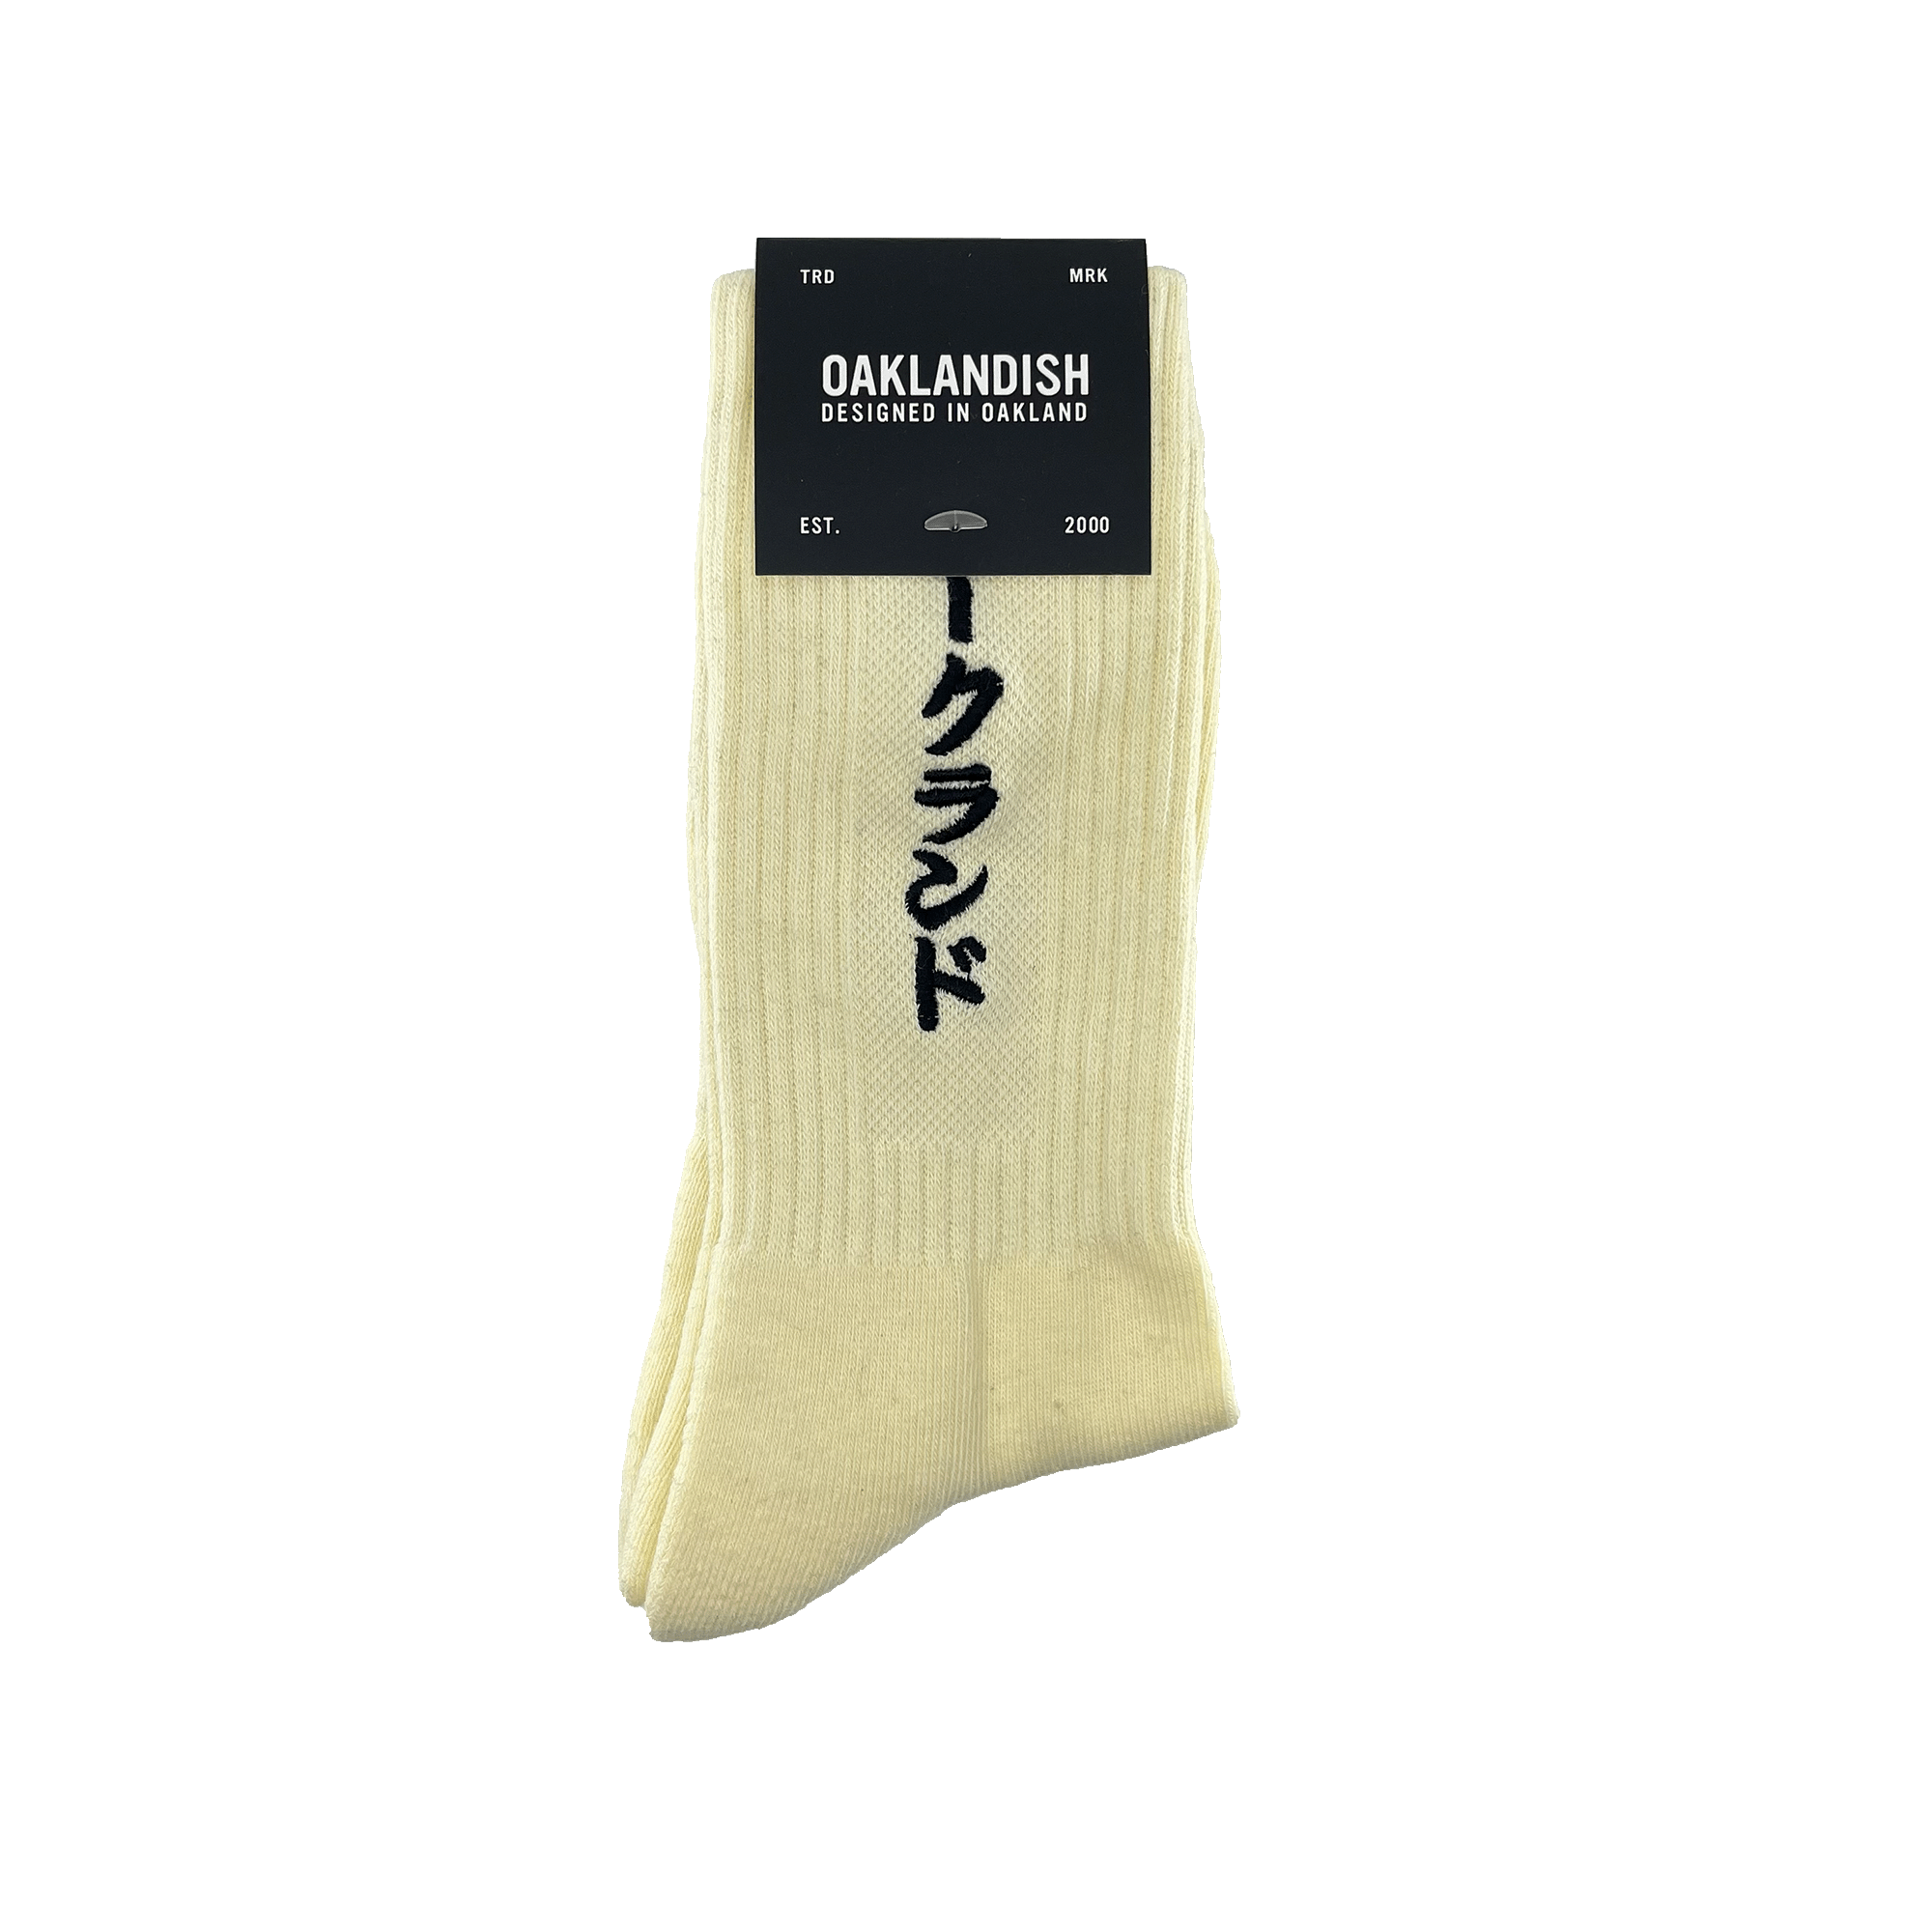 Pair folded white crew socks in Oaklandish packaging with a black embroidered Kanji Japanese script wordmark on the sock.